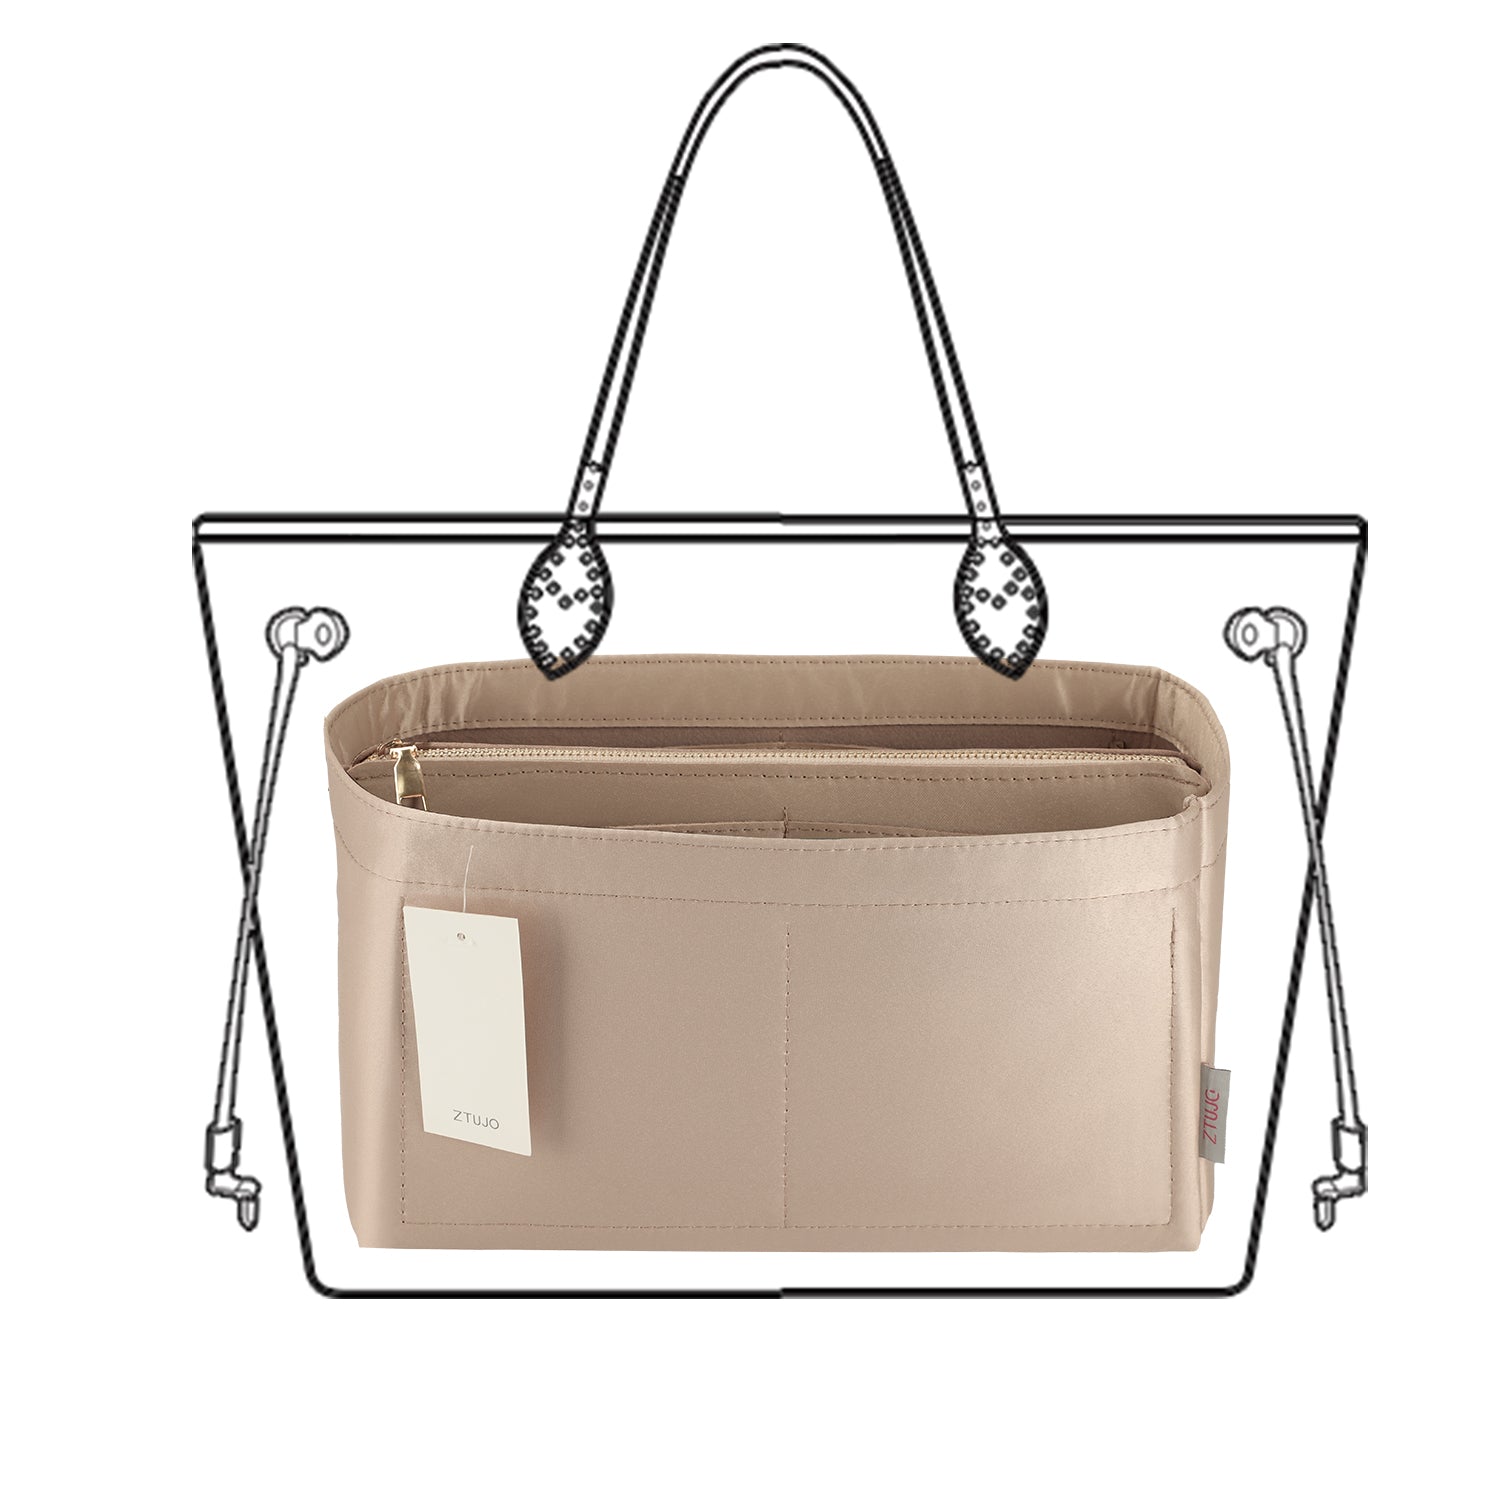 "Effortless Organization: Silky Touch Purse Organizer Insert with Zipper for Speedy, Neverfull, ONTHEGO, Tote, and More!"